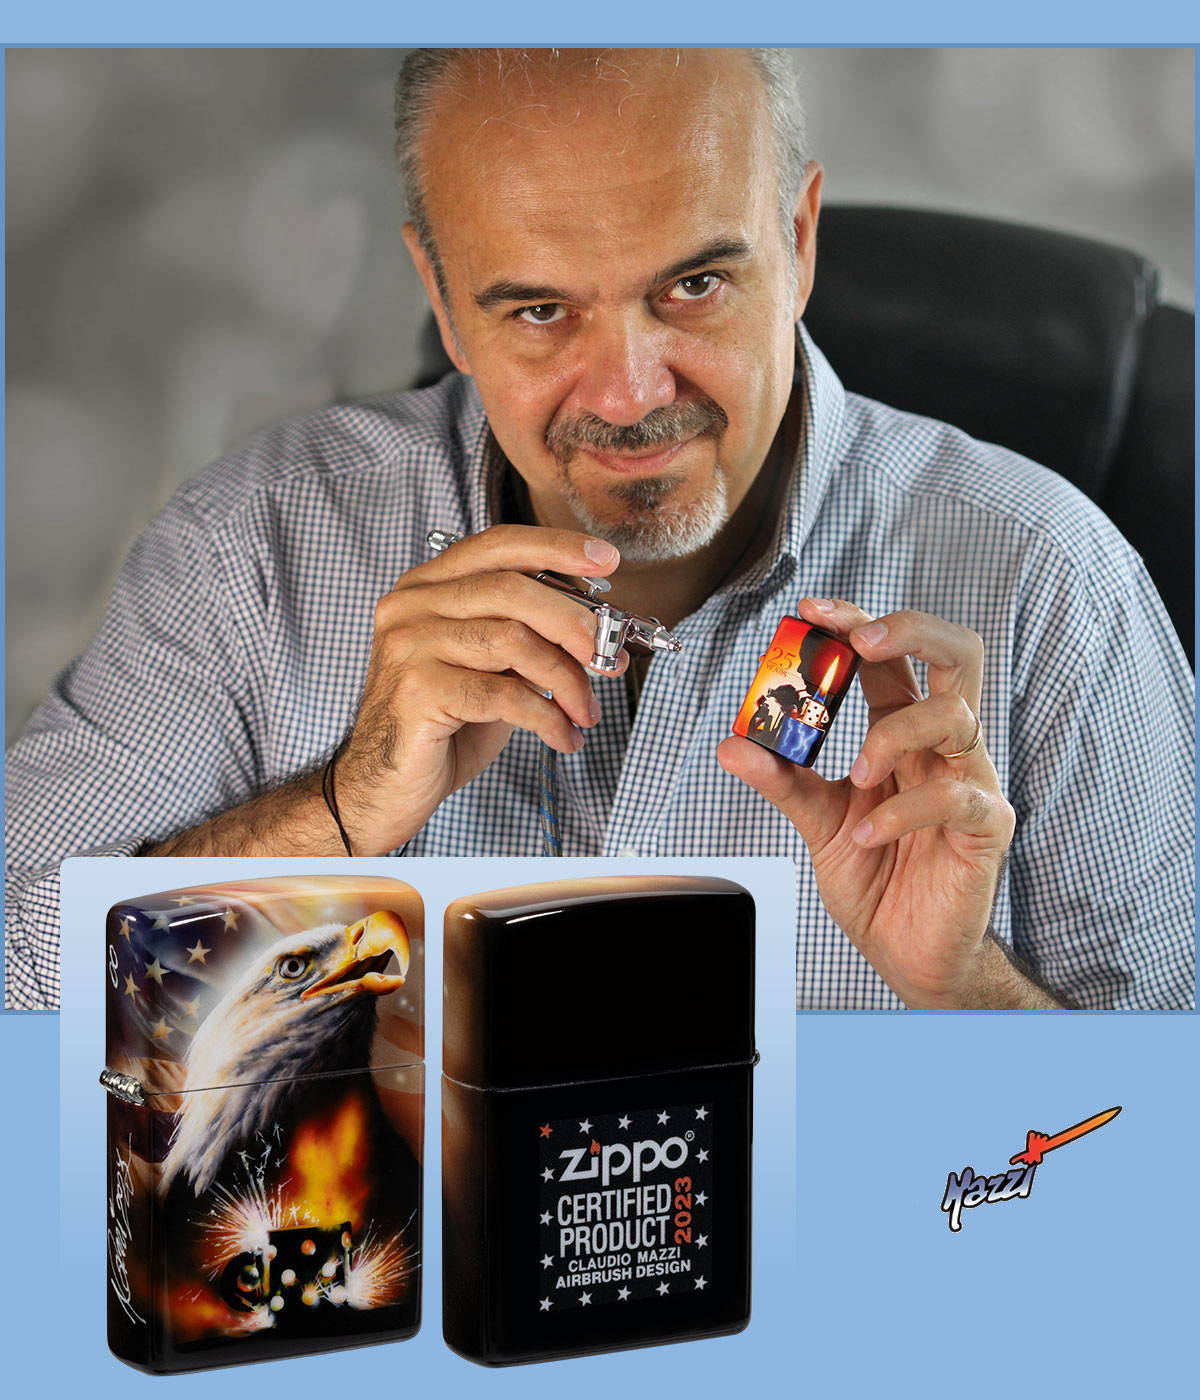 Claudio Mazzi with previous lighter design, and new lighter design revealed.